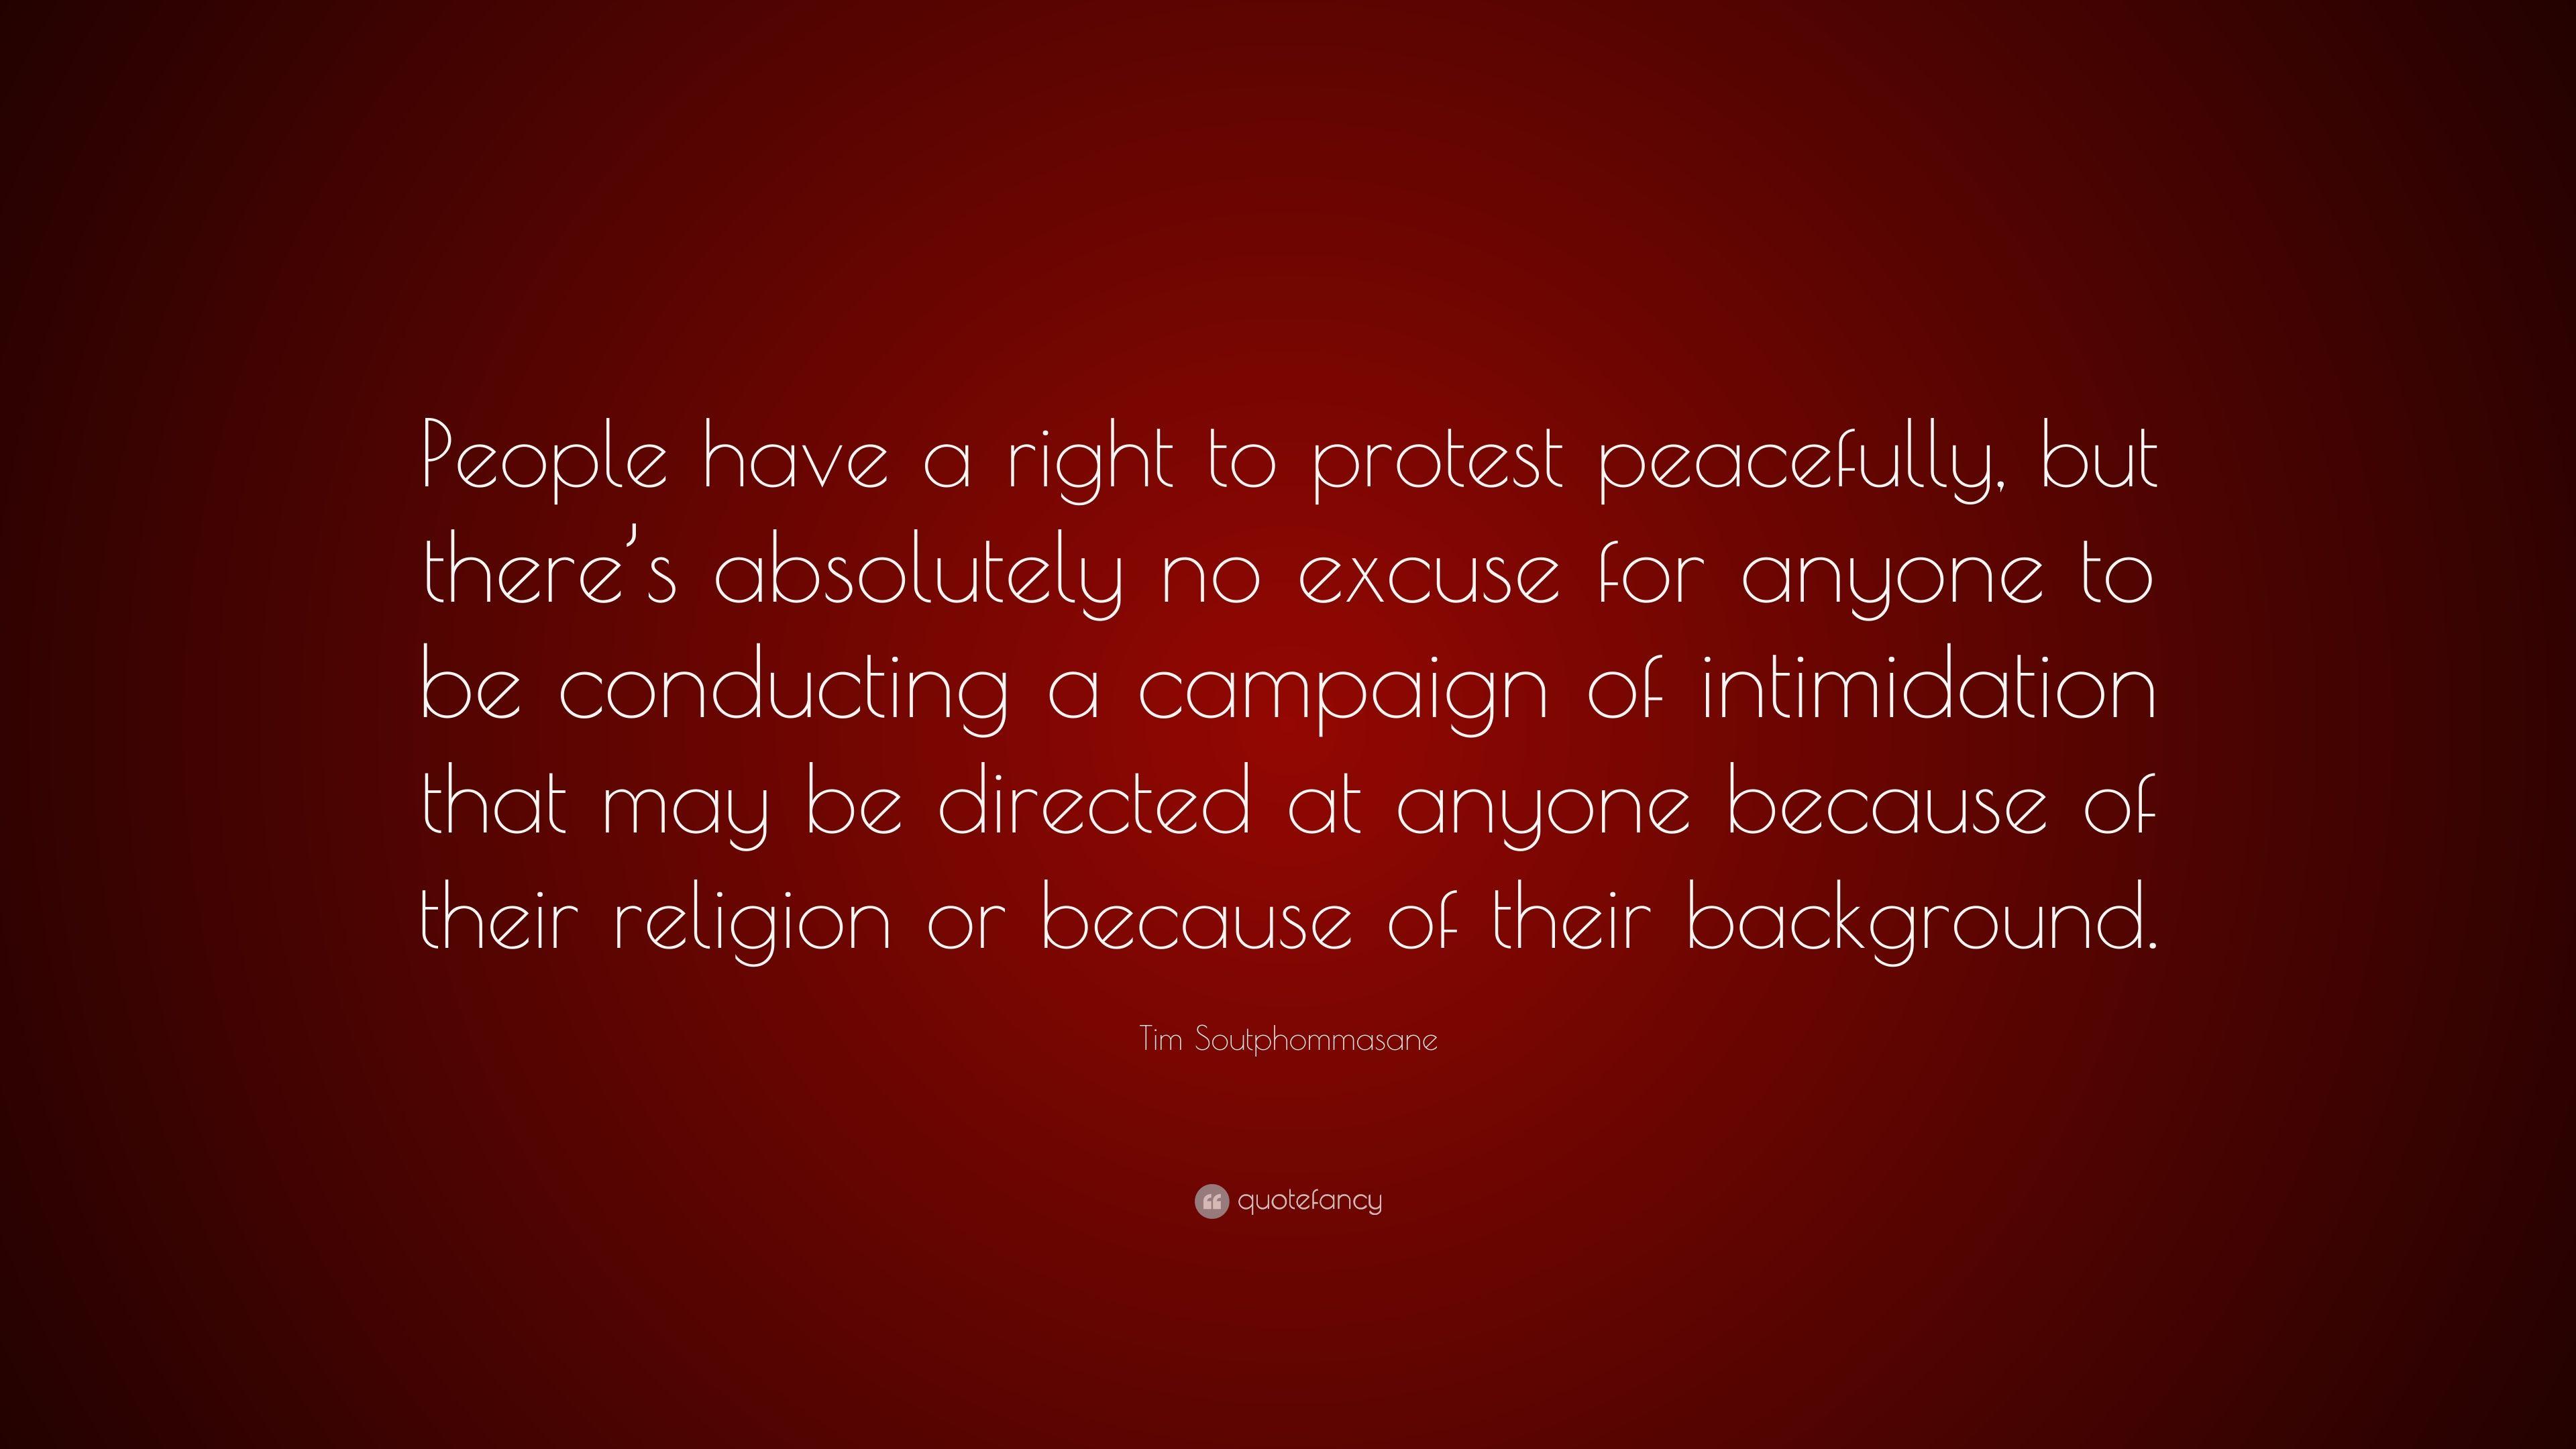 Tim Soutphommasane Quote: “People have a right to protest peacefully